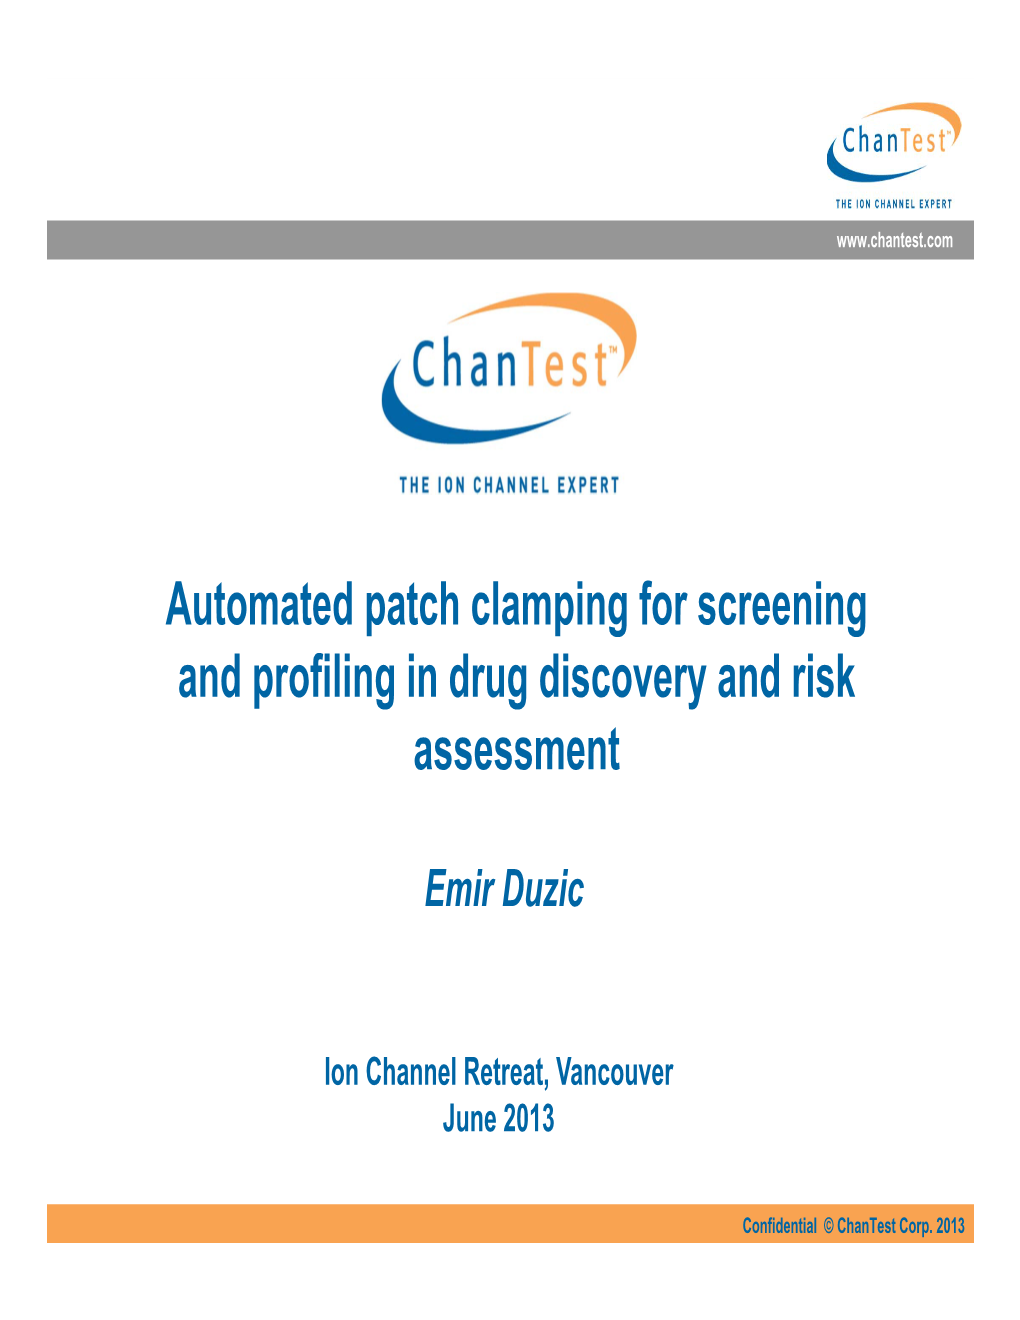 Automated Patch Clamping for Screening & Profiling in Drug